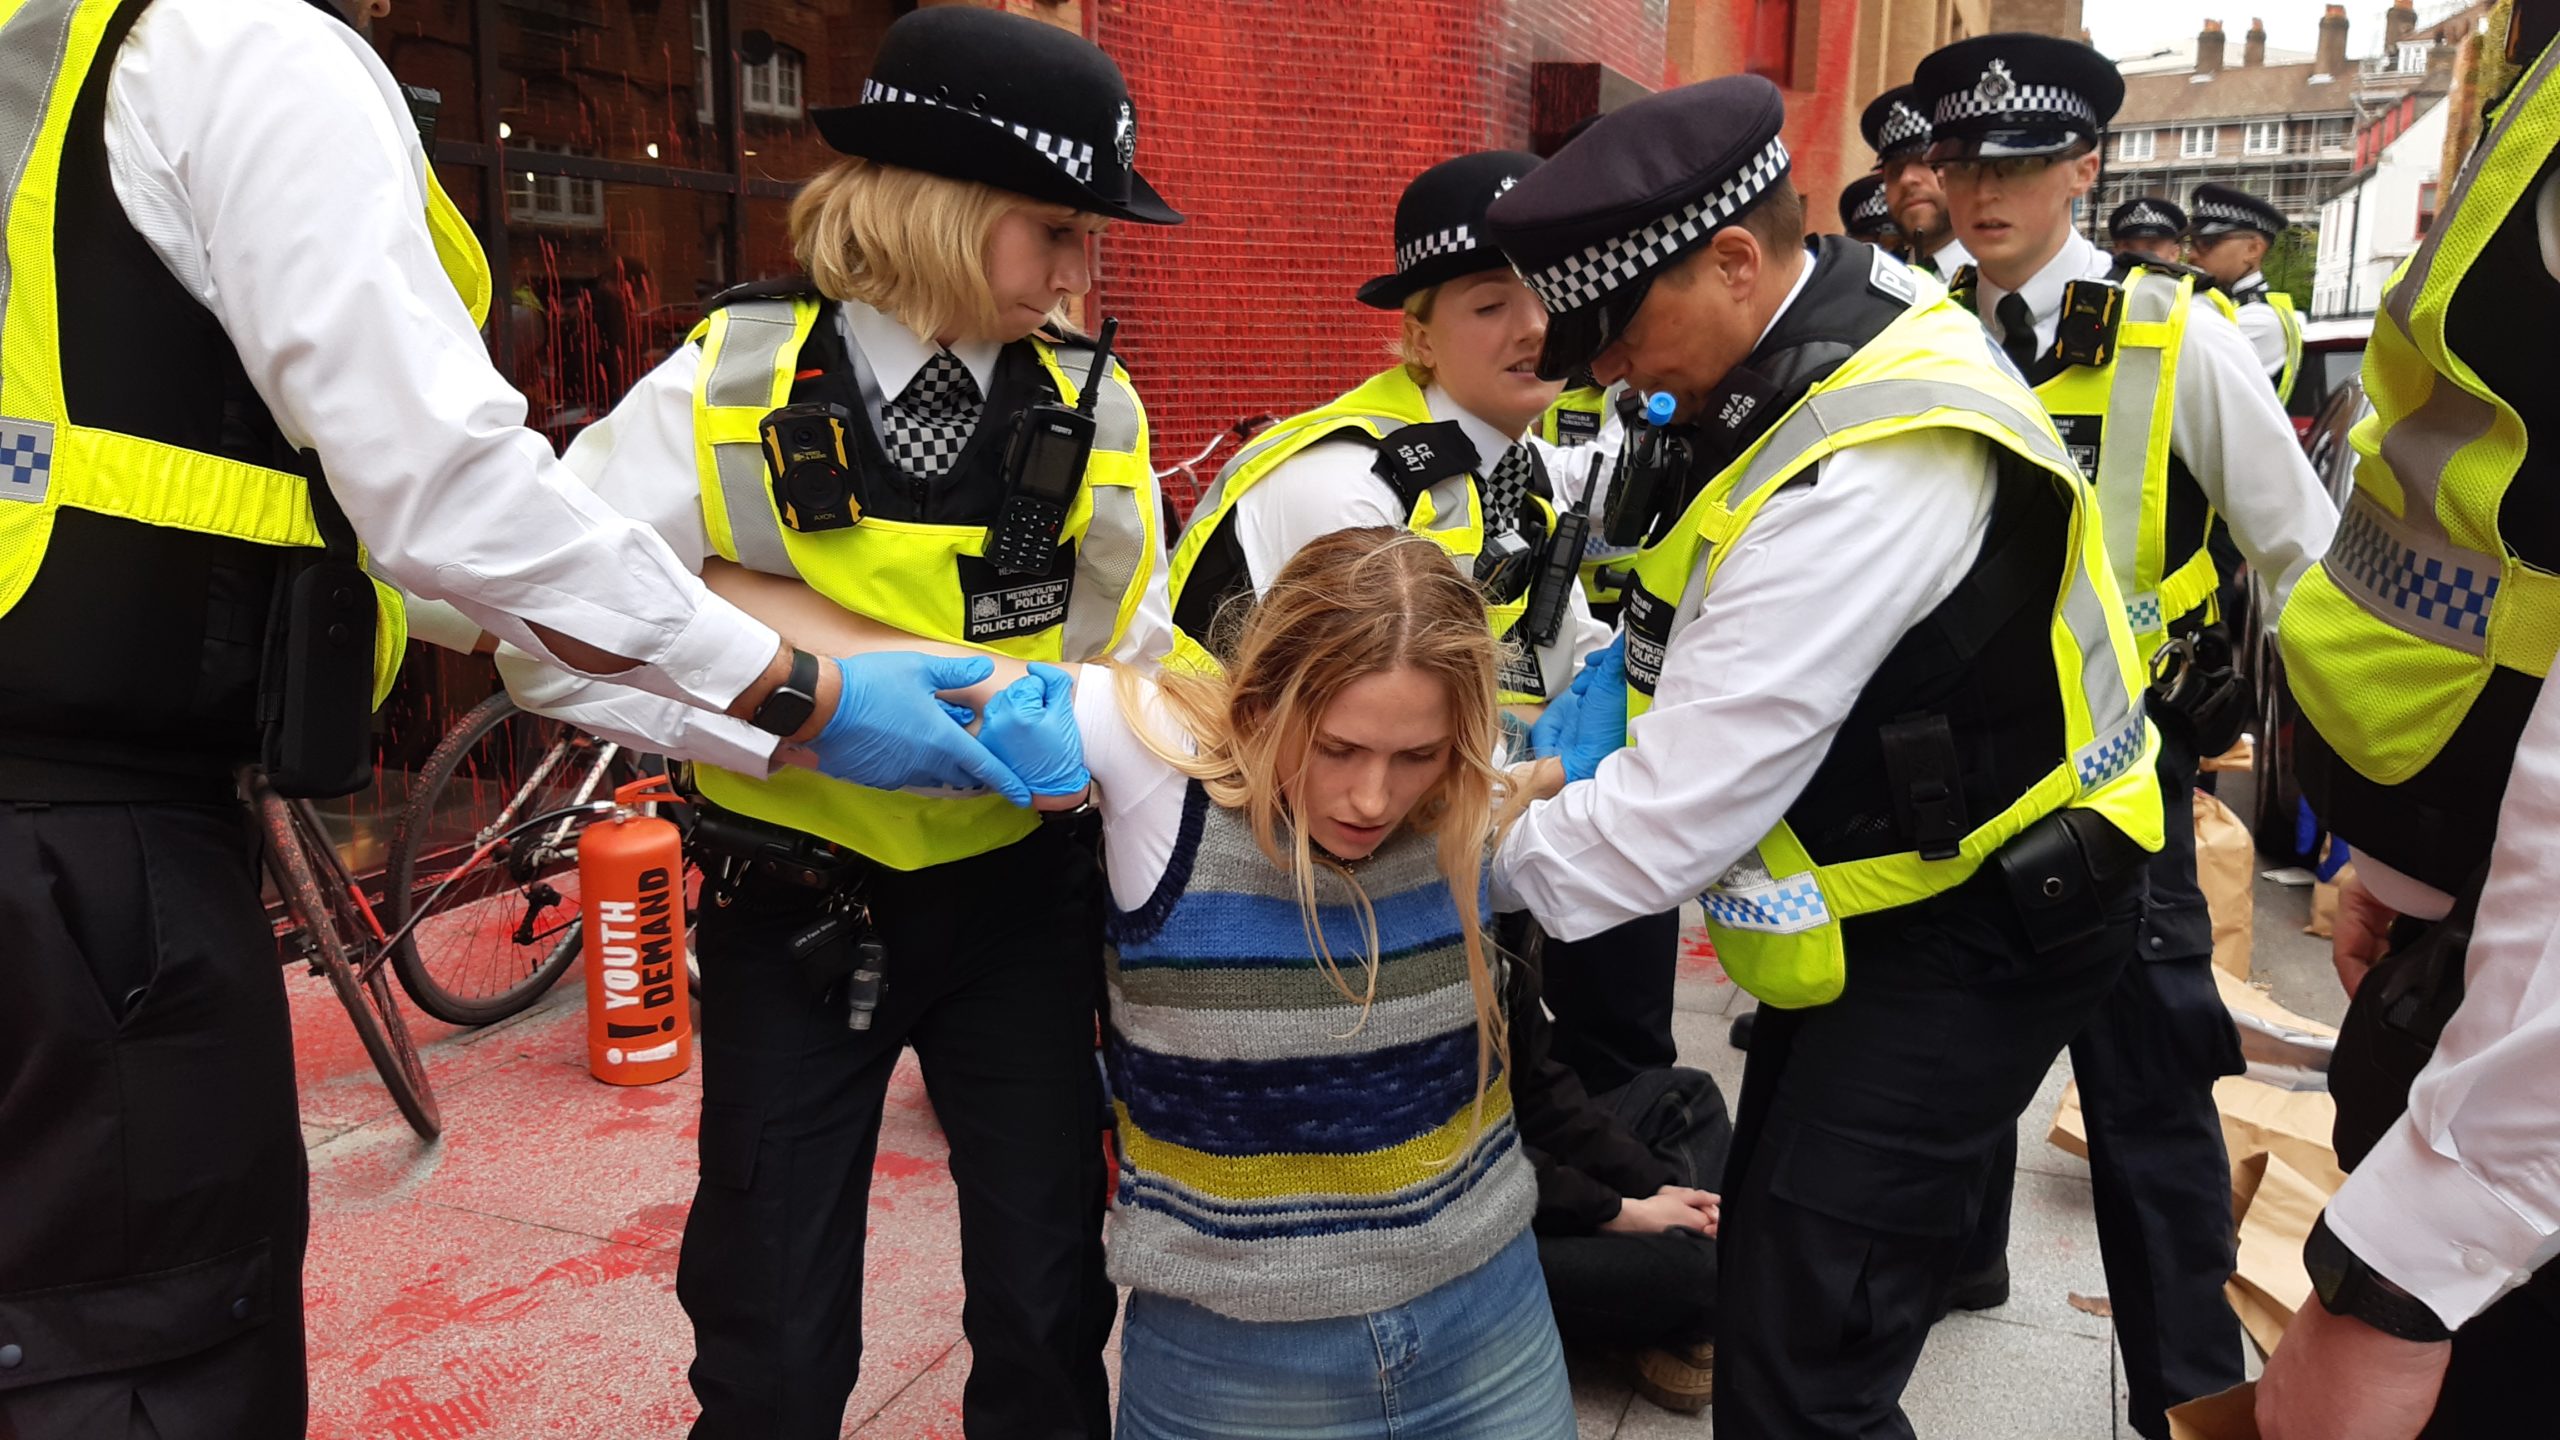 A Youth Demand Protester is detained by police in the U.K. 4/8/24. Photo courtesy of Youth Demand.